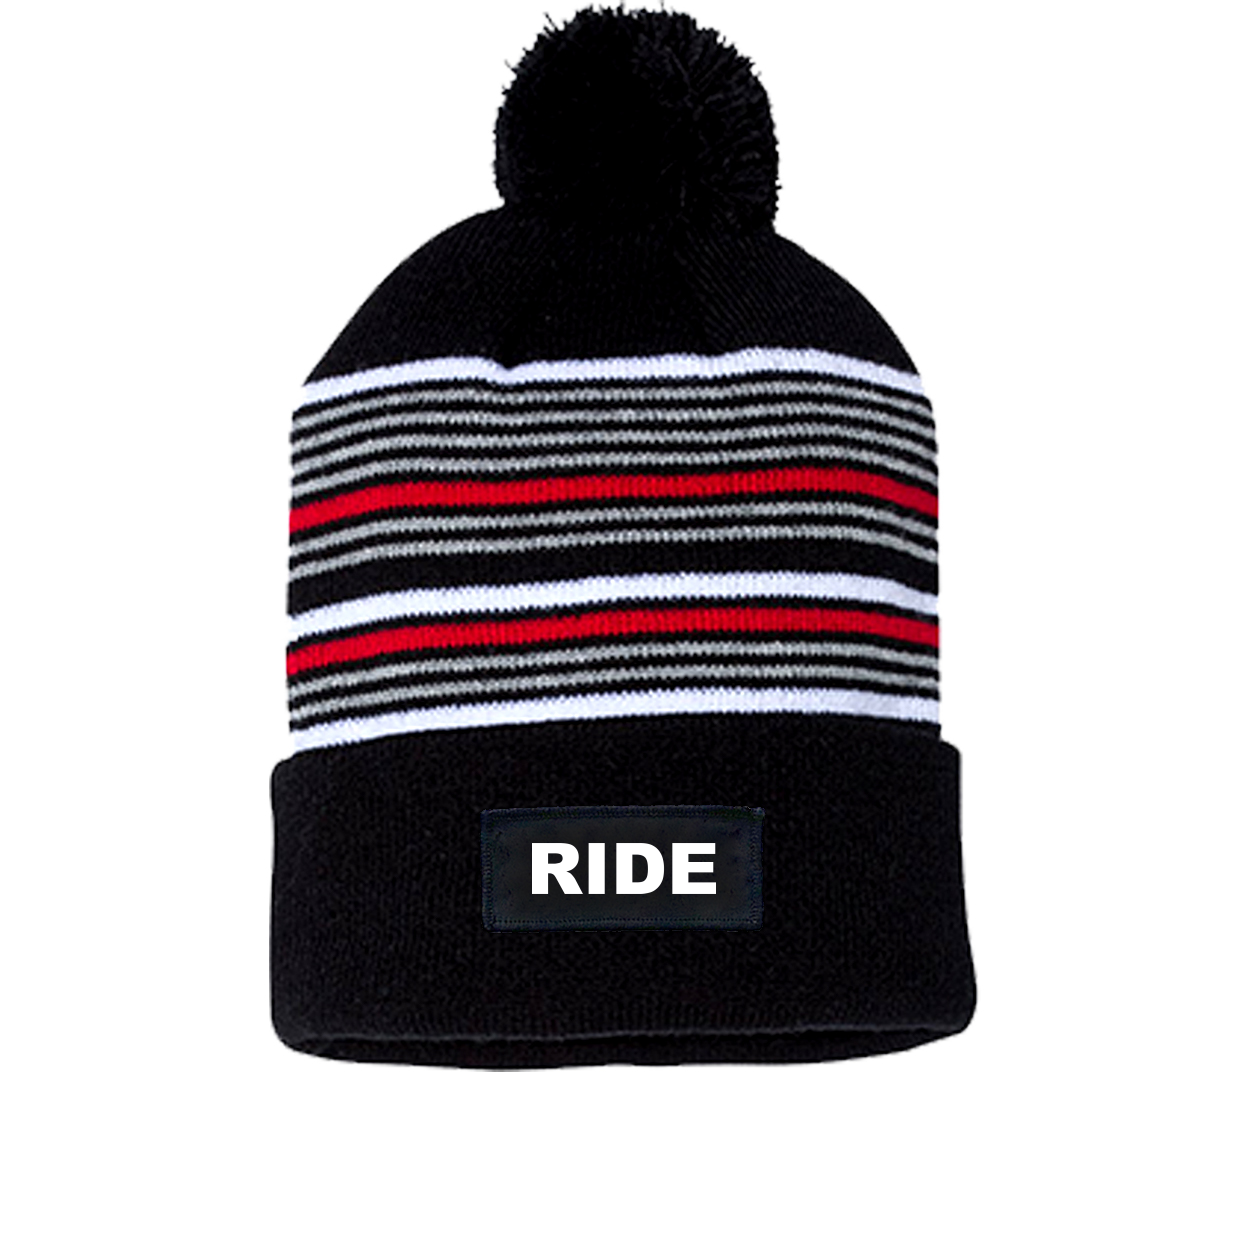 Ride Brand Logo Night Out Woven Patch Roll Up Pom Knit Beanie Black/ White/ Grey/ Red Beanie